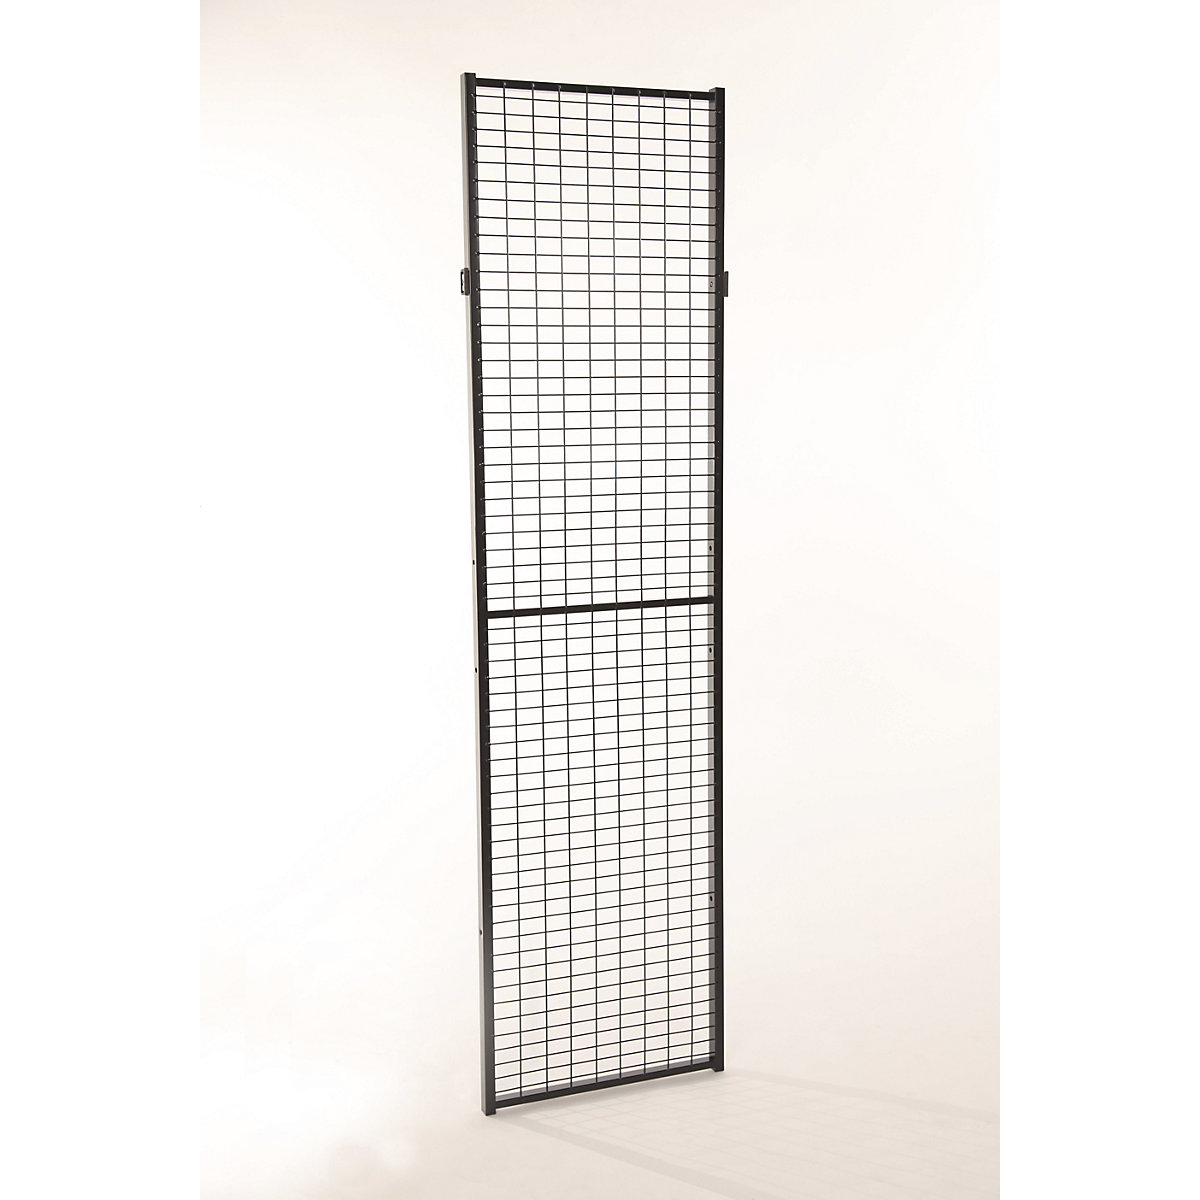 X-GUARD CLASSIC machine protective fencing, wall section – Axelent, height 2200 mm, width 250 mm-12